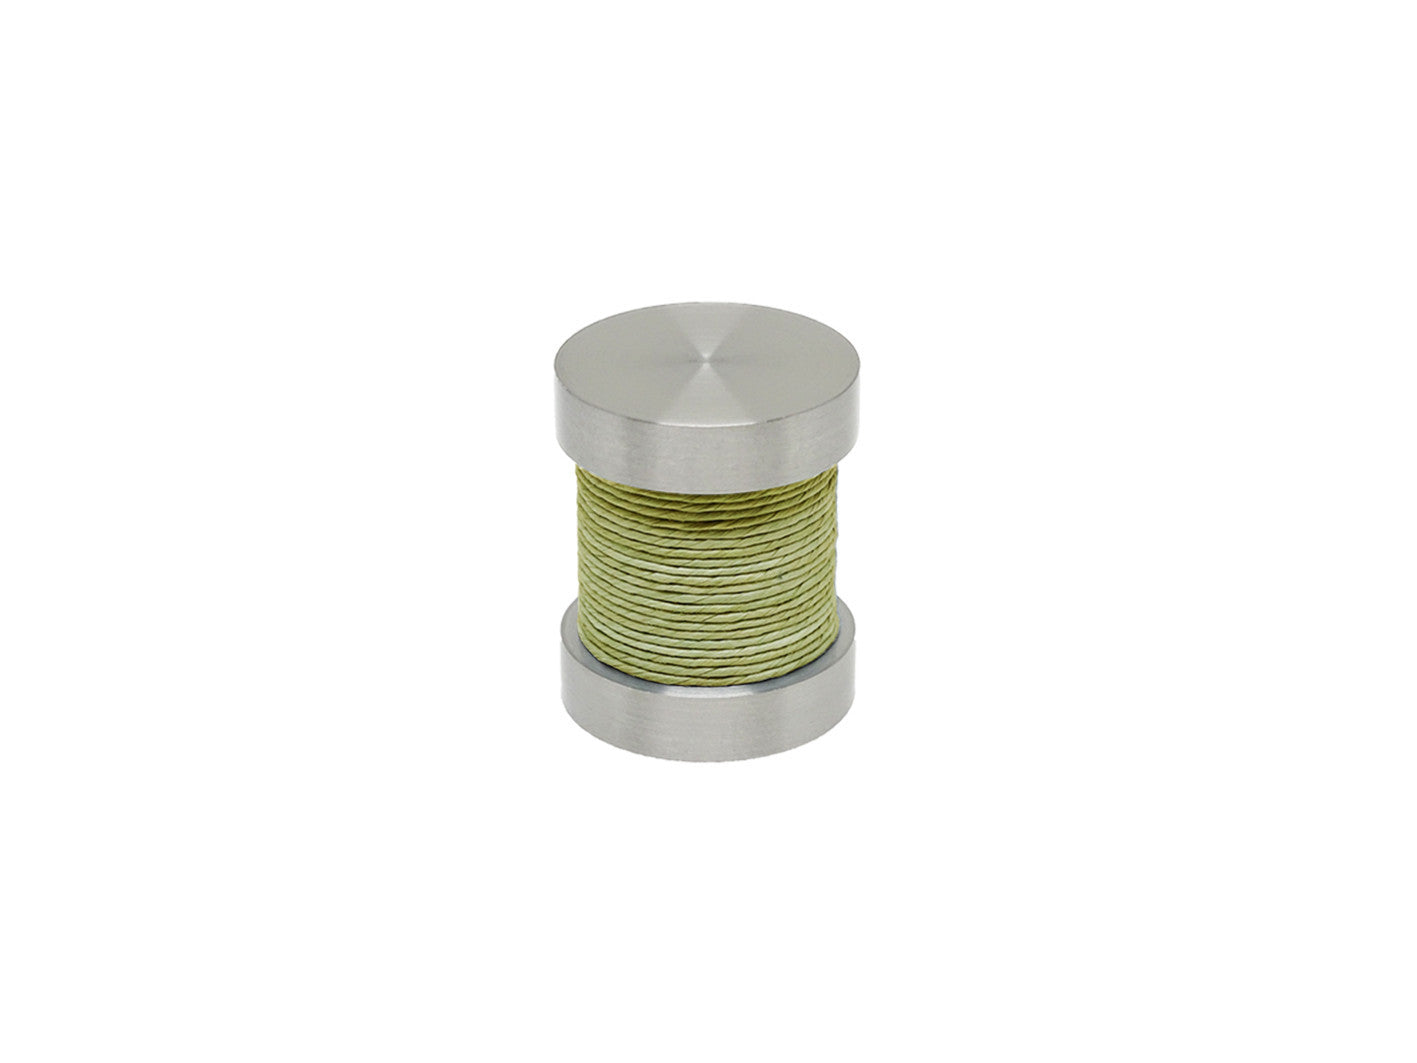 Avocado green coloured twine groove finial | Walcot House 30mm stainless steel collection